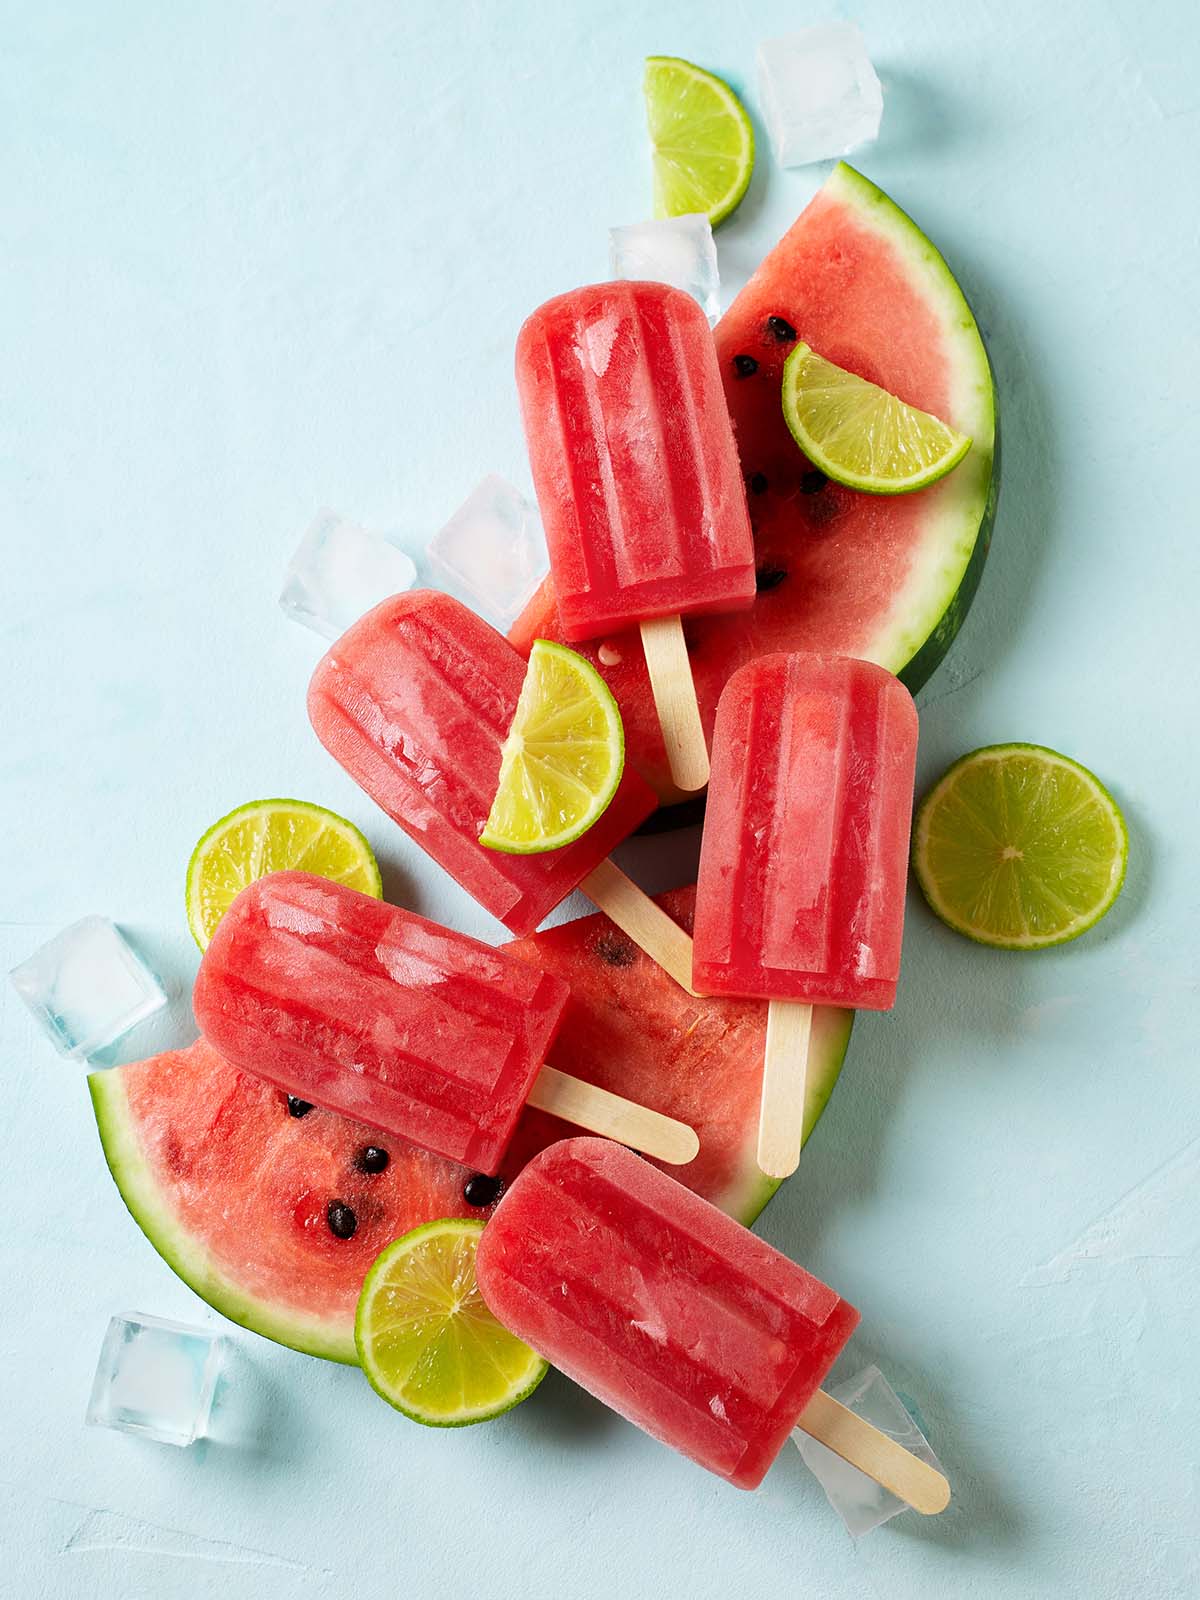 Watermelon popsicle with ice cube and lime on plate, on blue background, top view.